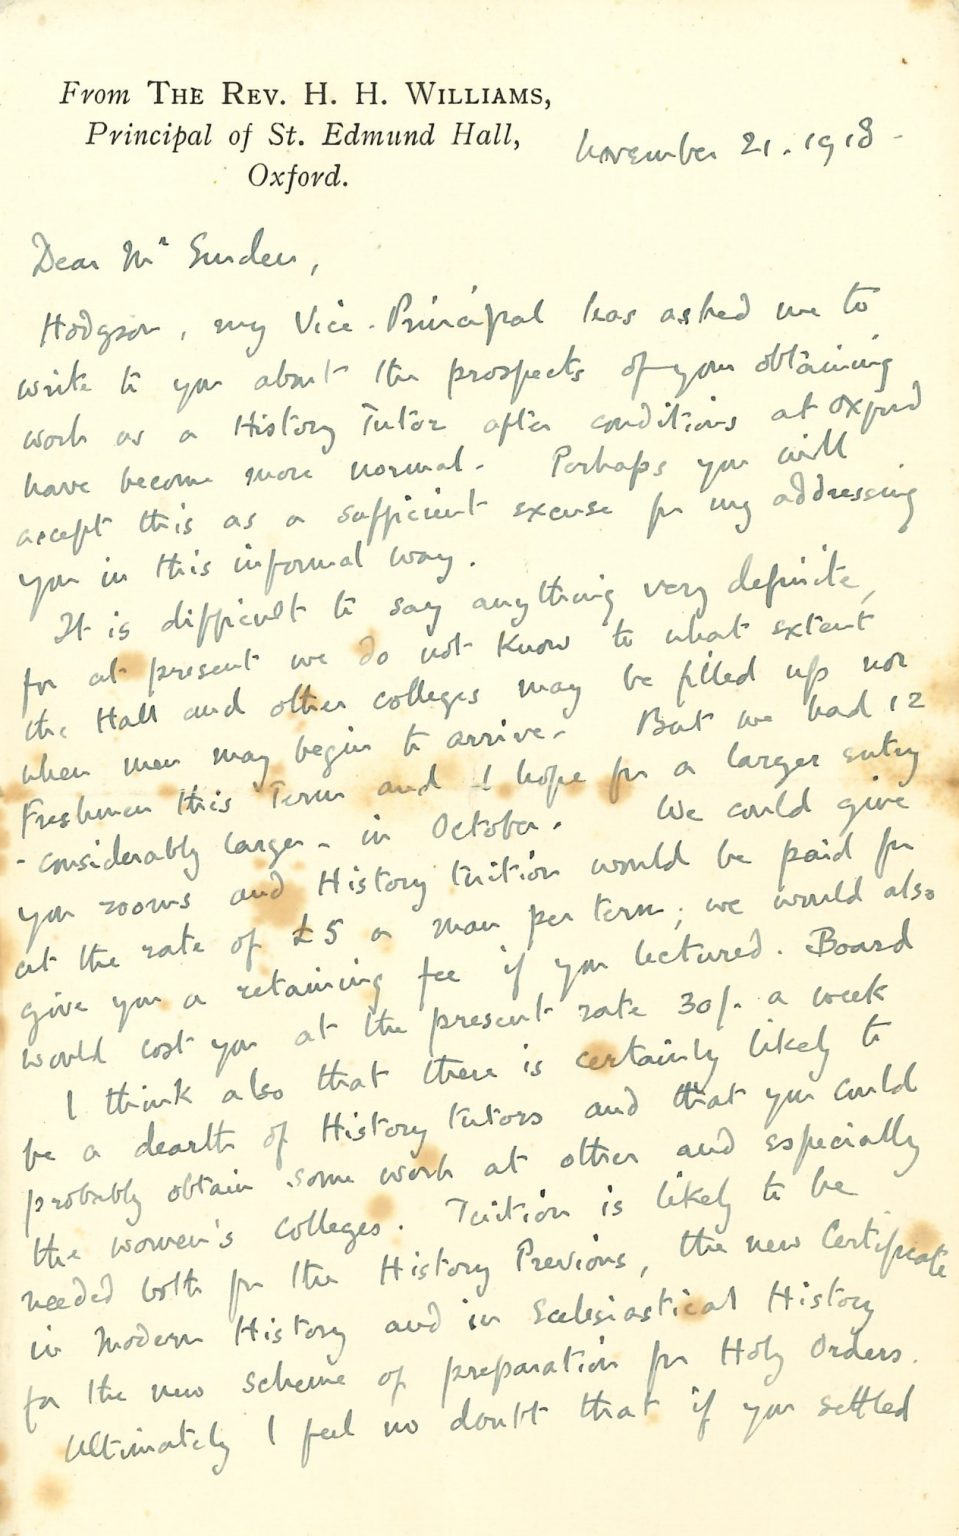 Letter written by Principal Williams inviting Emden to join the Hall